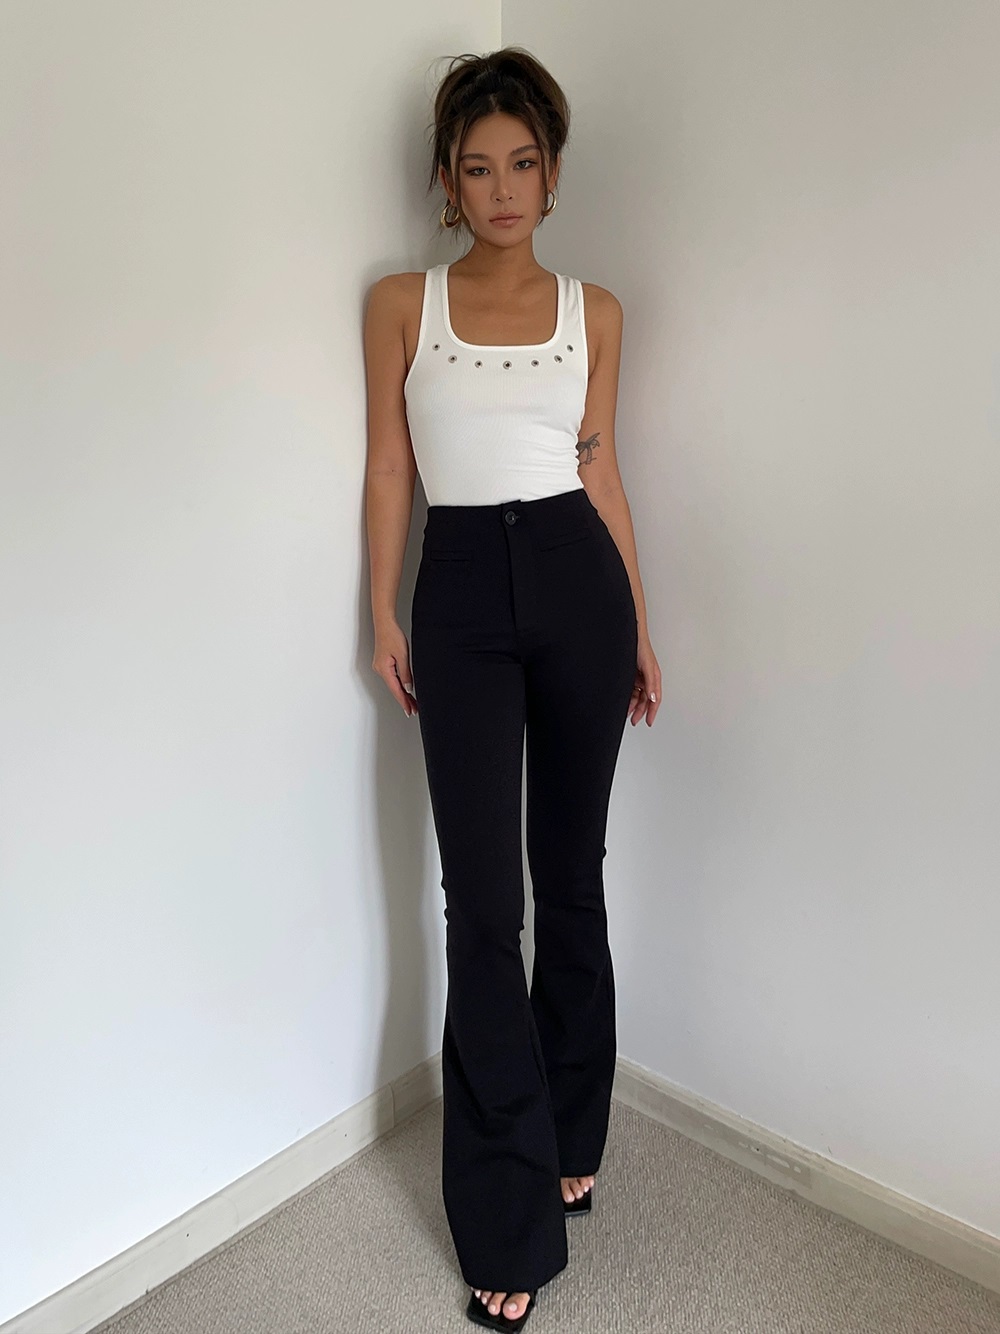 Homemade High-waisted Elastic Micro-bell Trousers Loose Pants Casual Pants